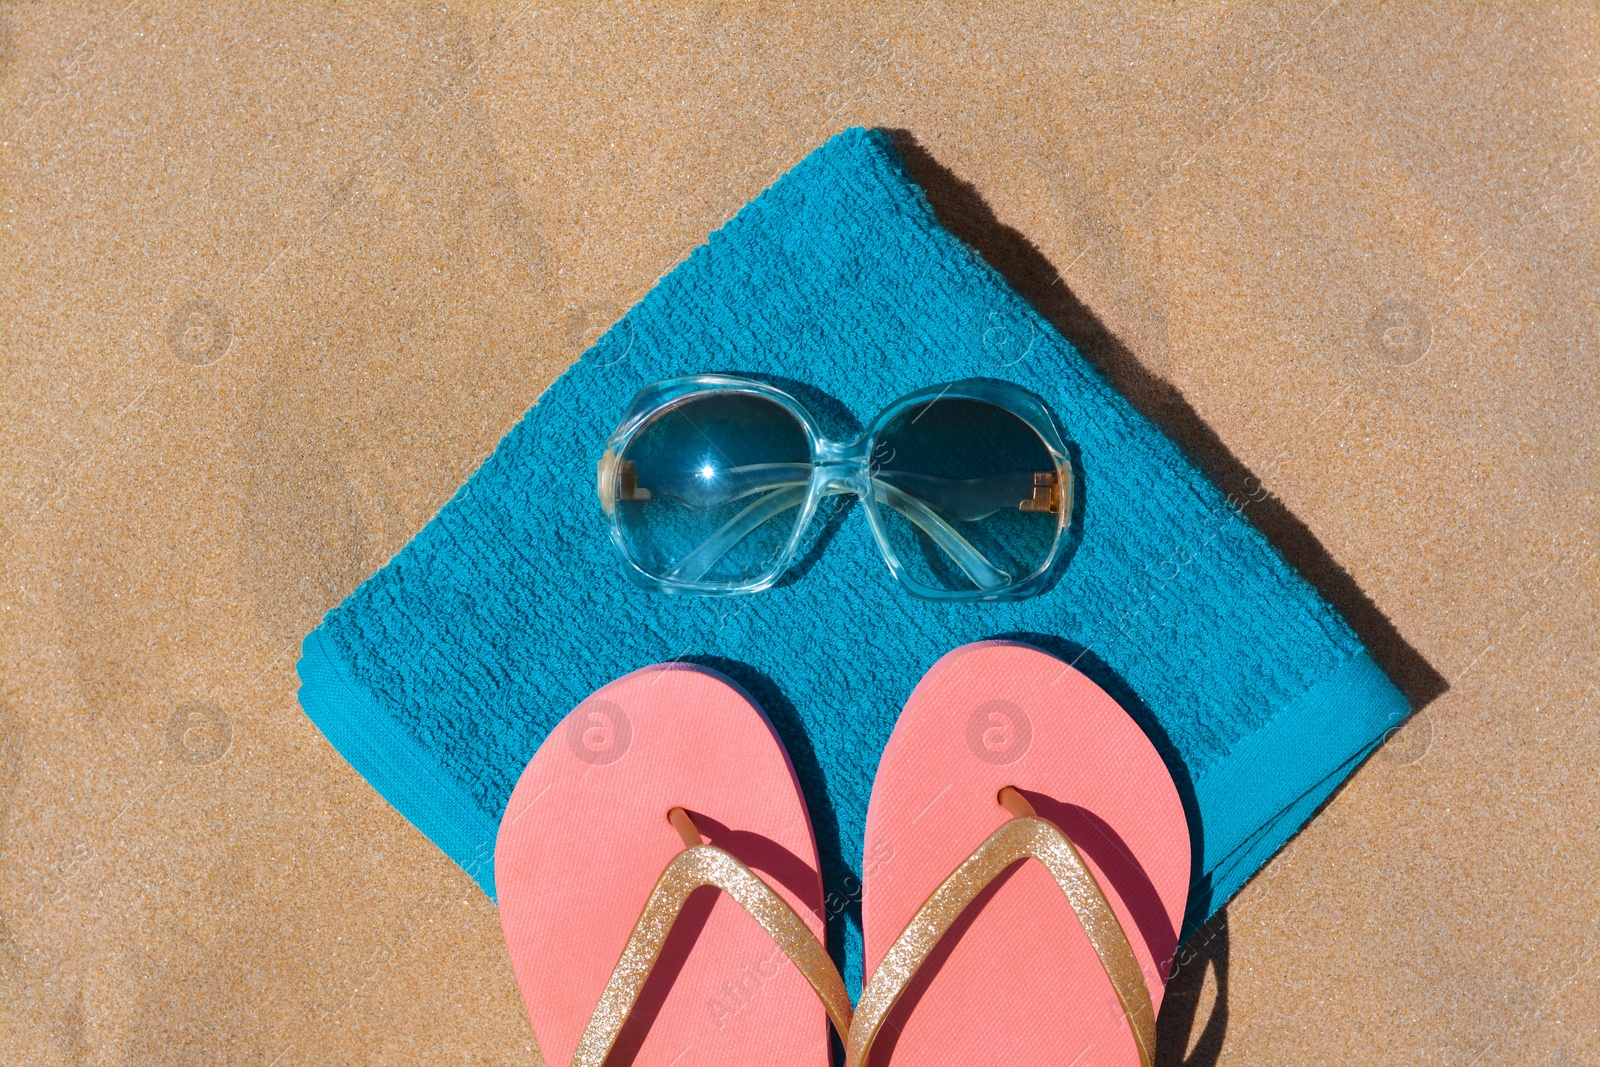 Photo of Folded soft blue beach towel with flip flops and sunglasses on sand, flat lay